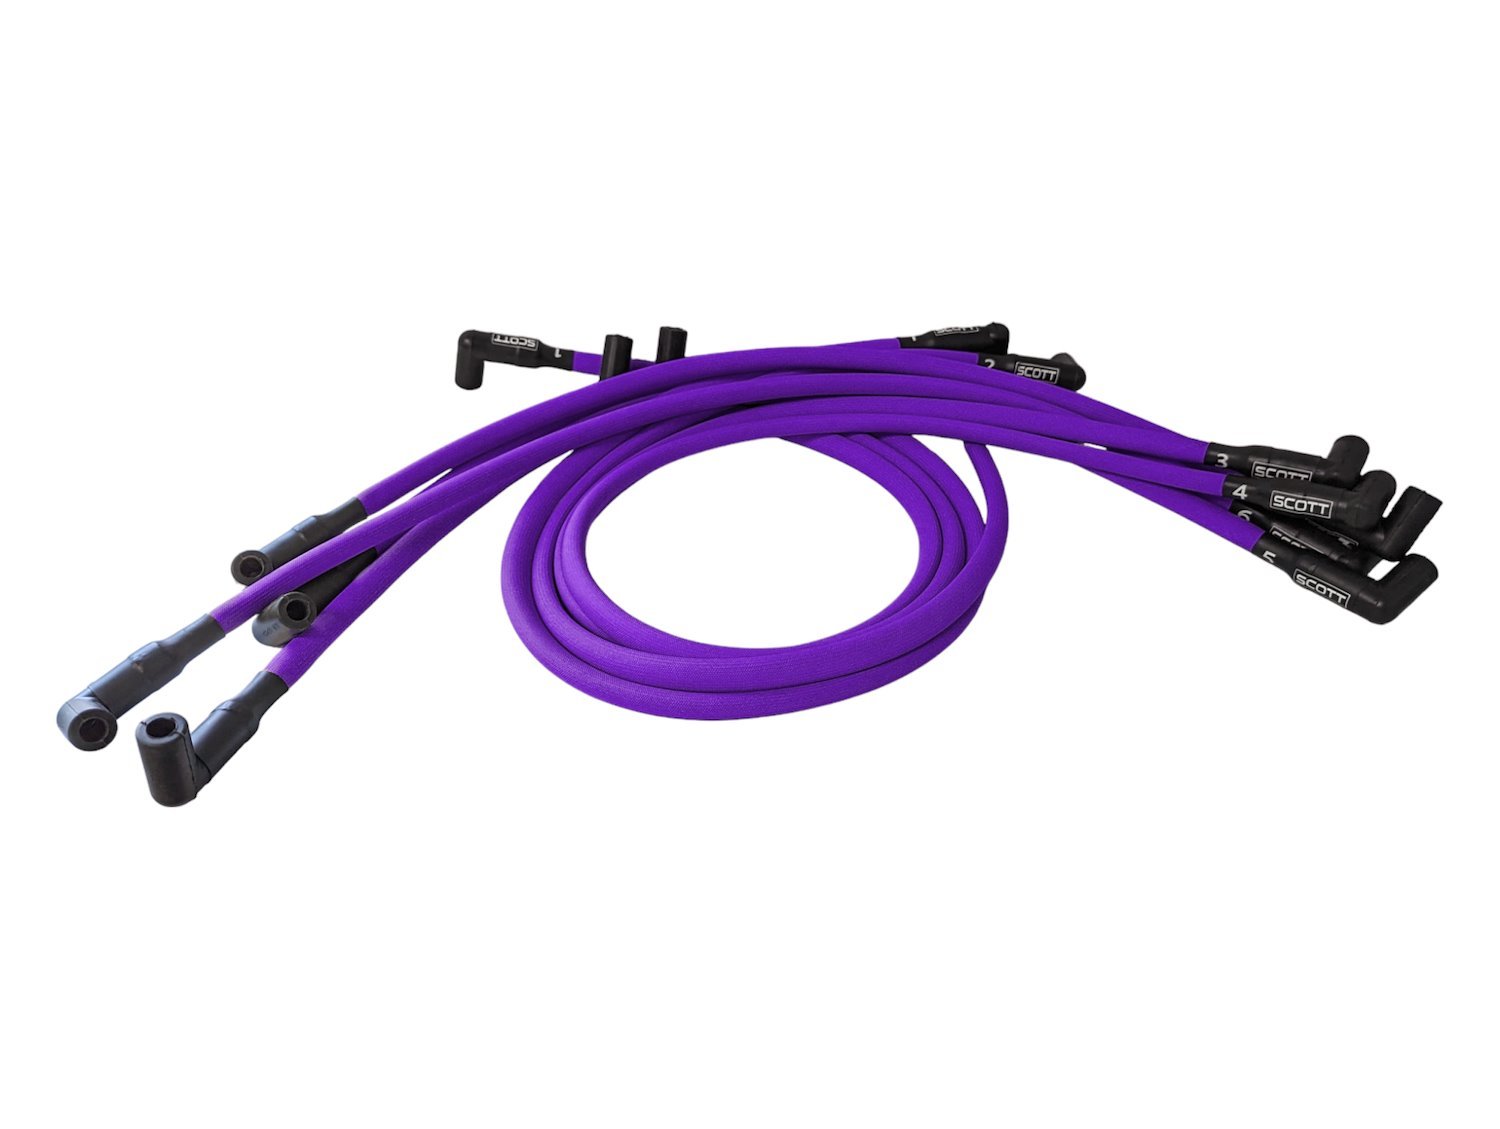 SPW-PS-402-7 High-Performance Fiberglass-Oversleeved Spark Plug Wire Set for Small Block Chevy, Over Valve Cover [Purple]